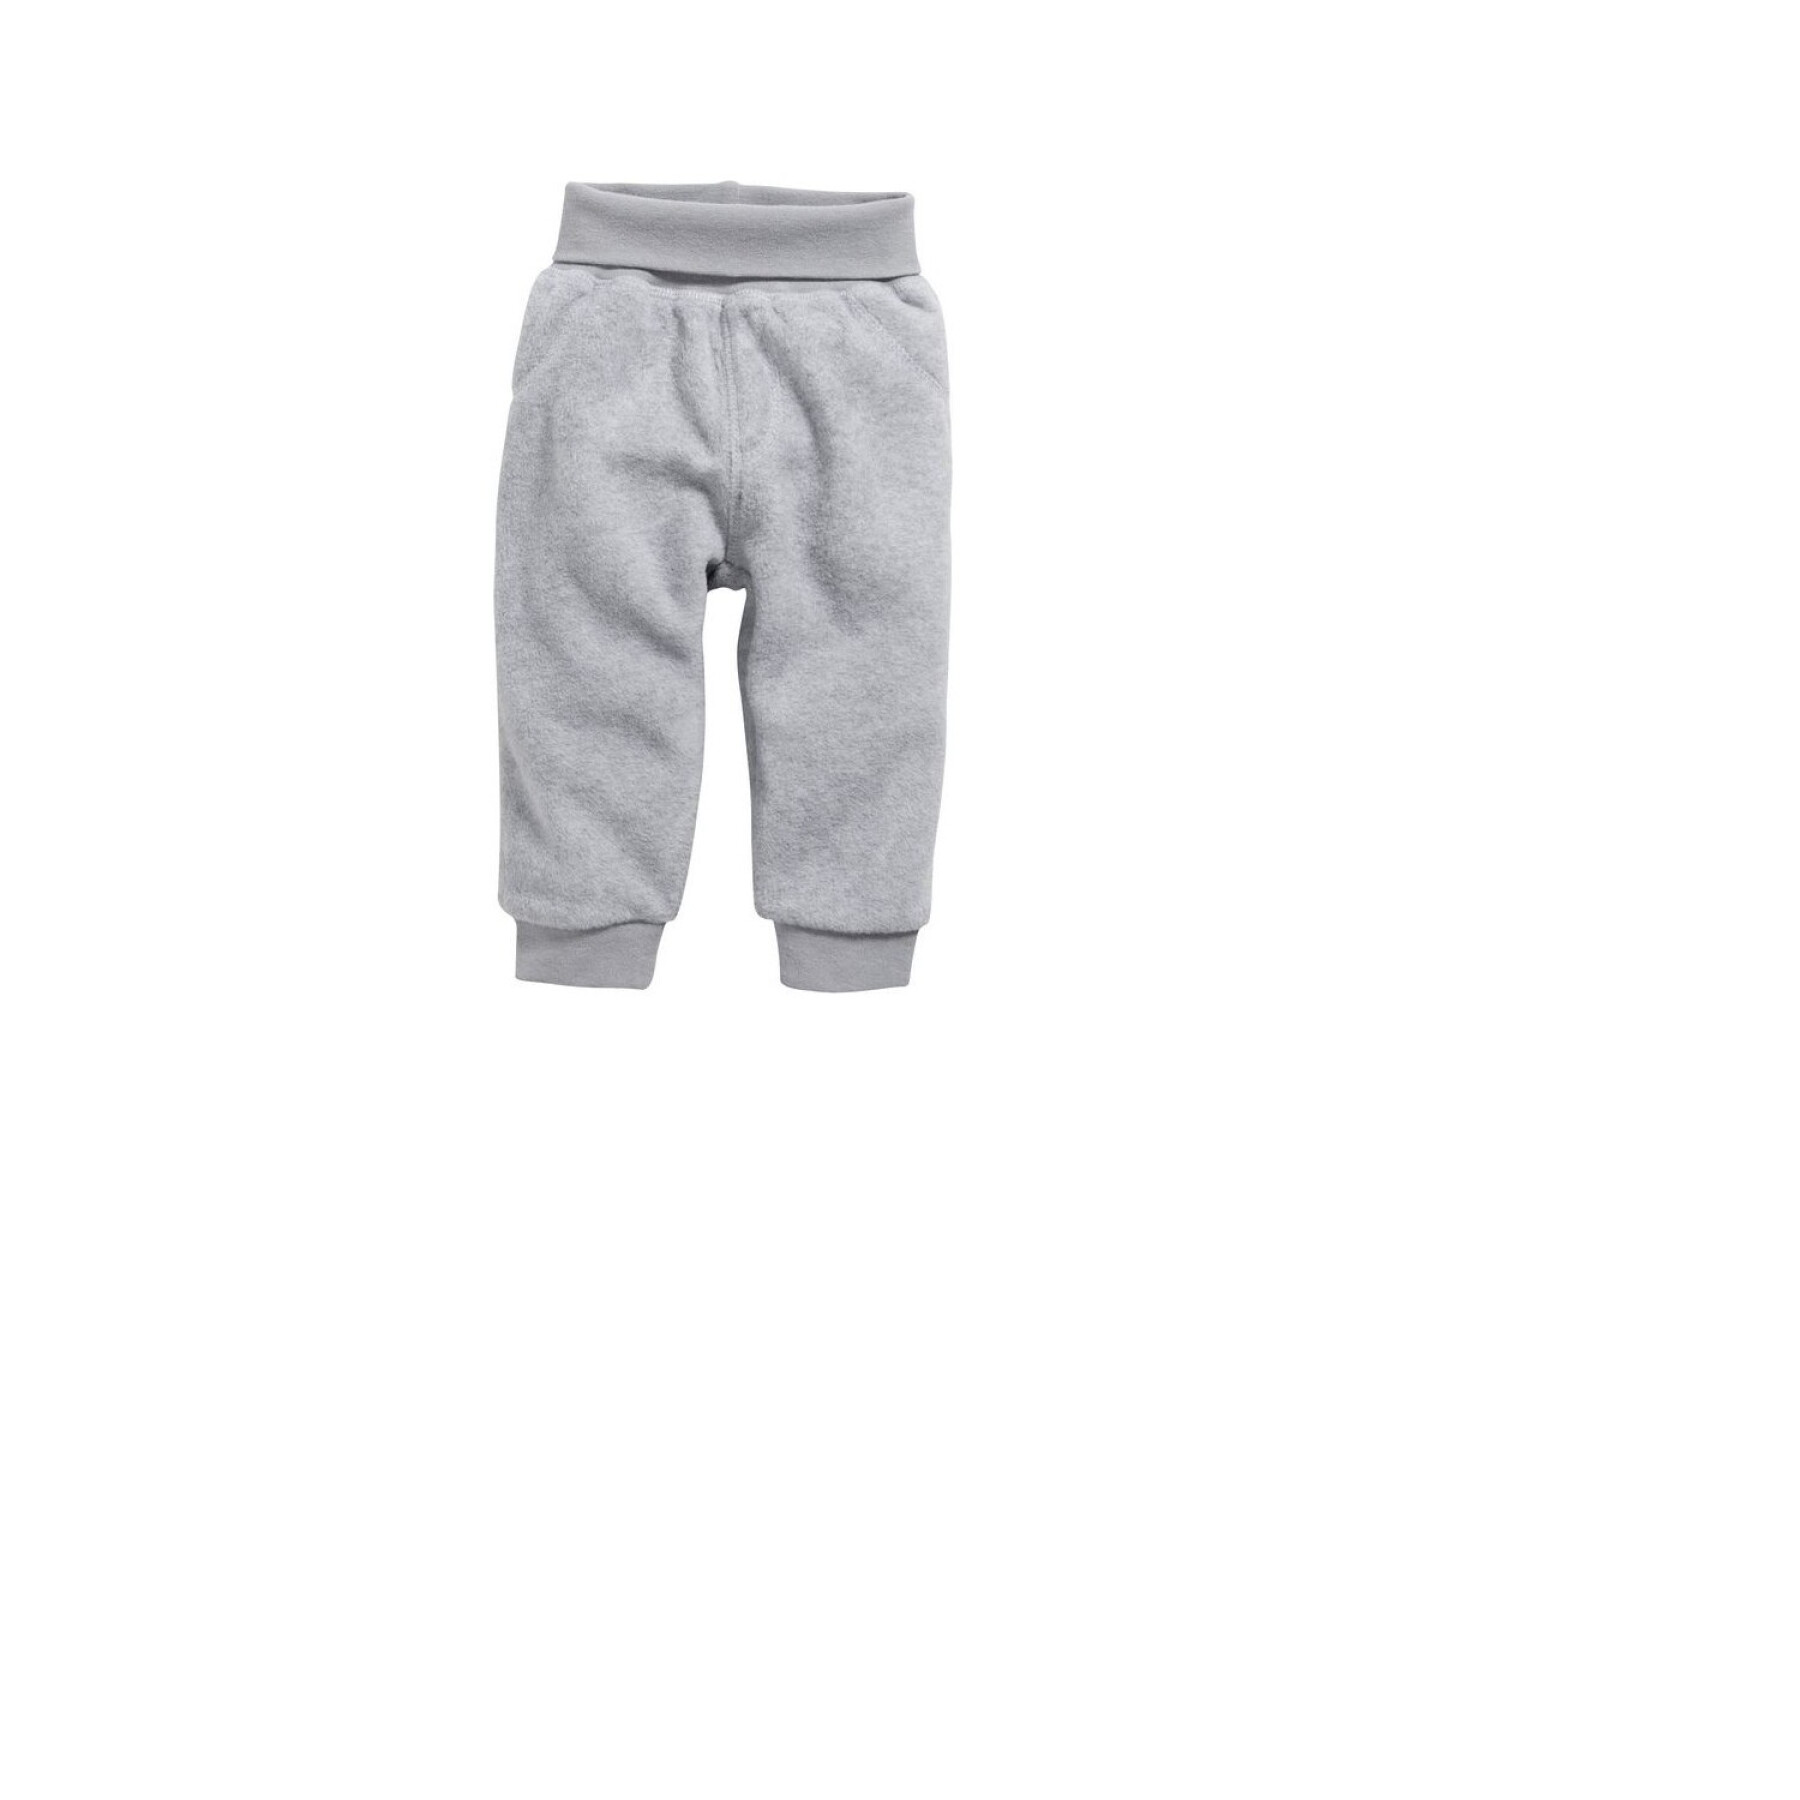 Puffy fleece jogging suit with baby knit cuffs Playshoes